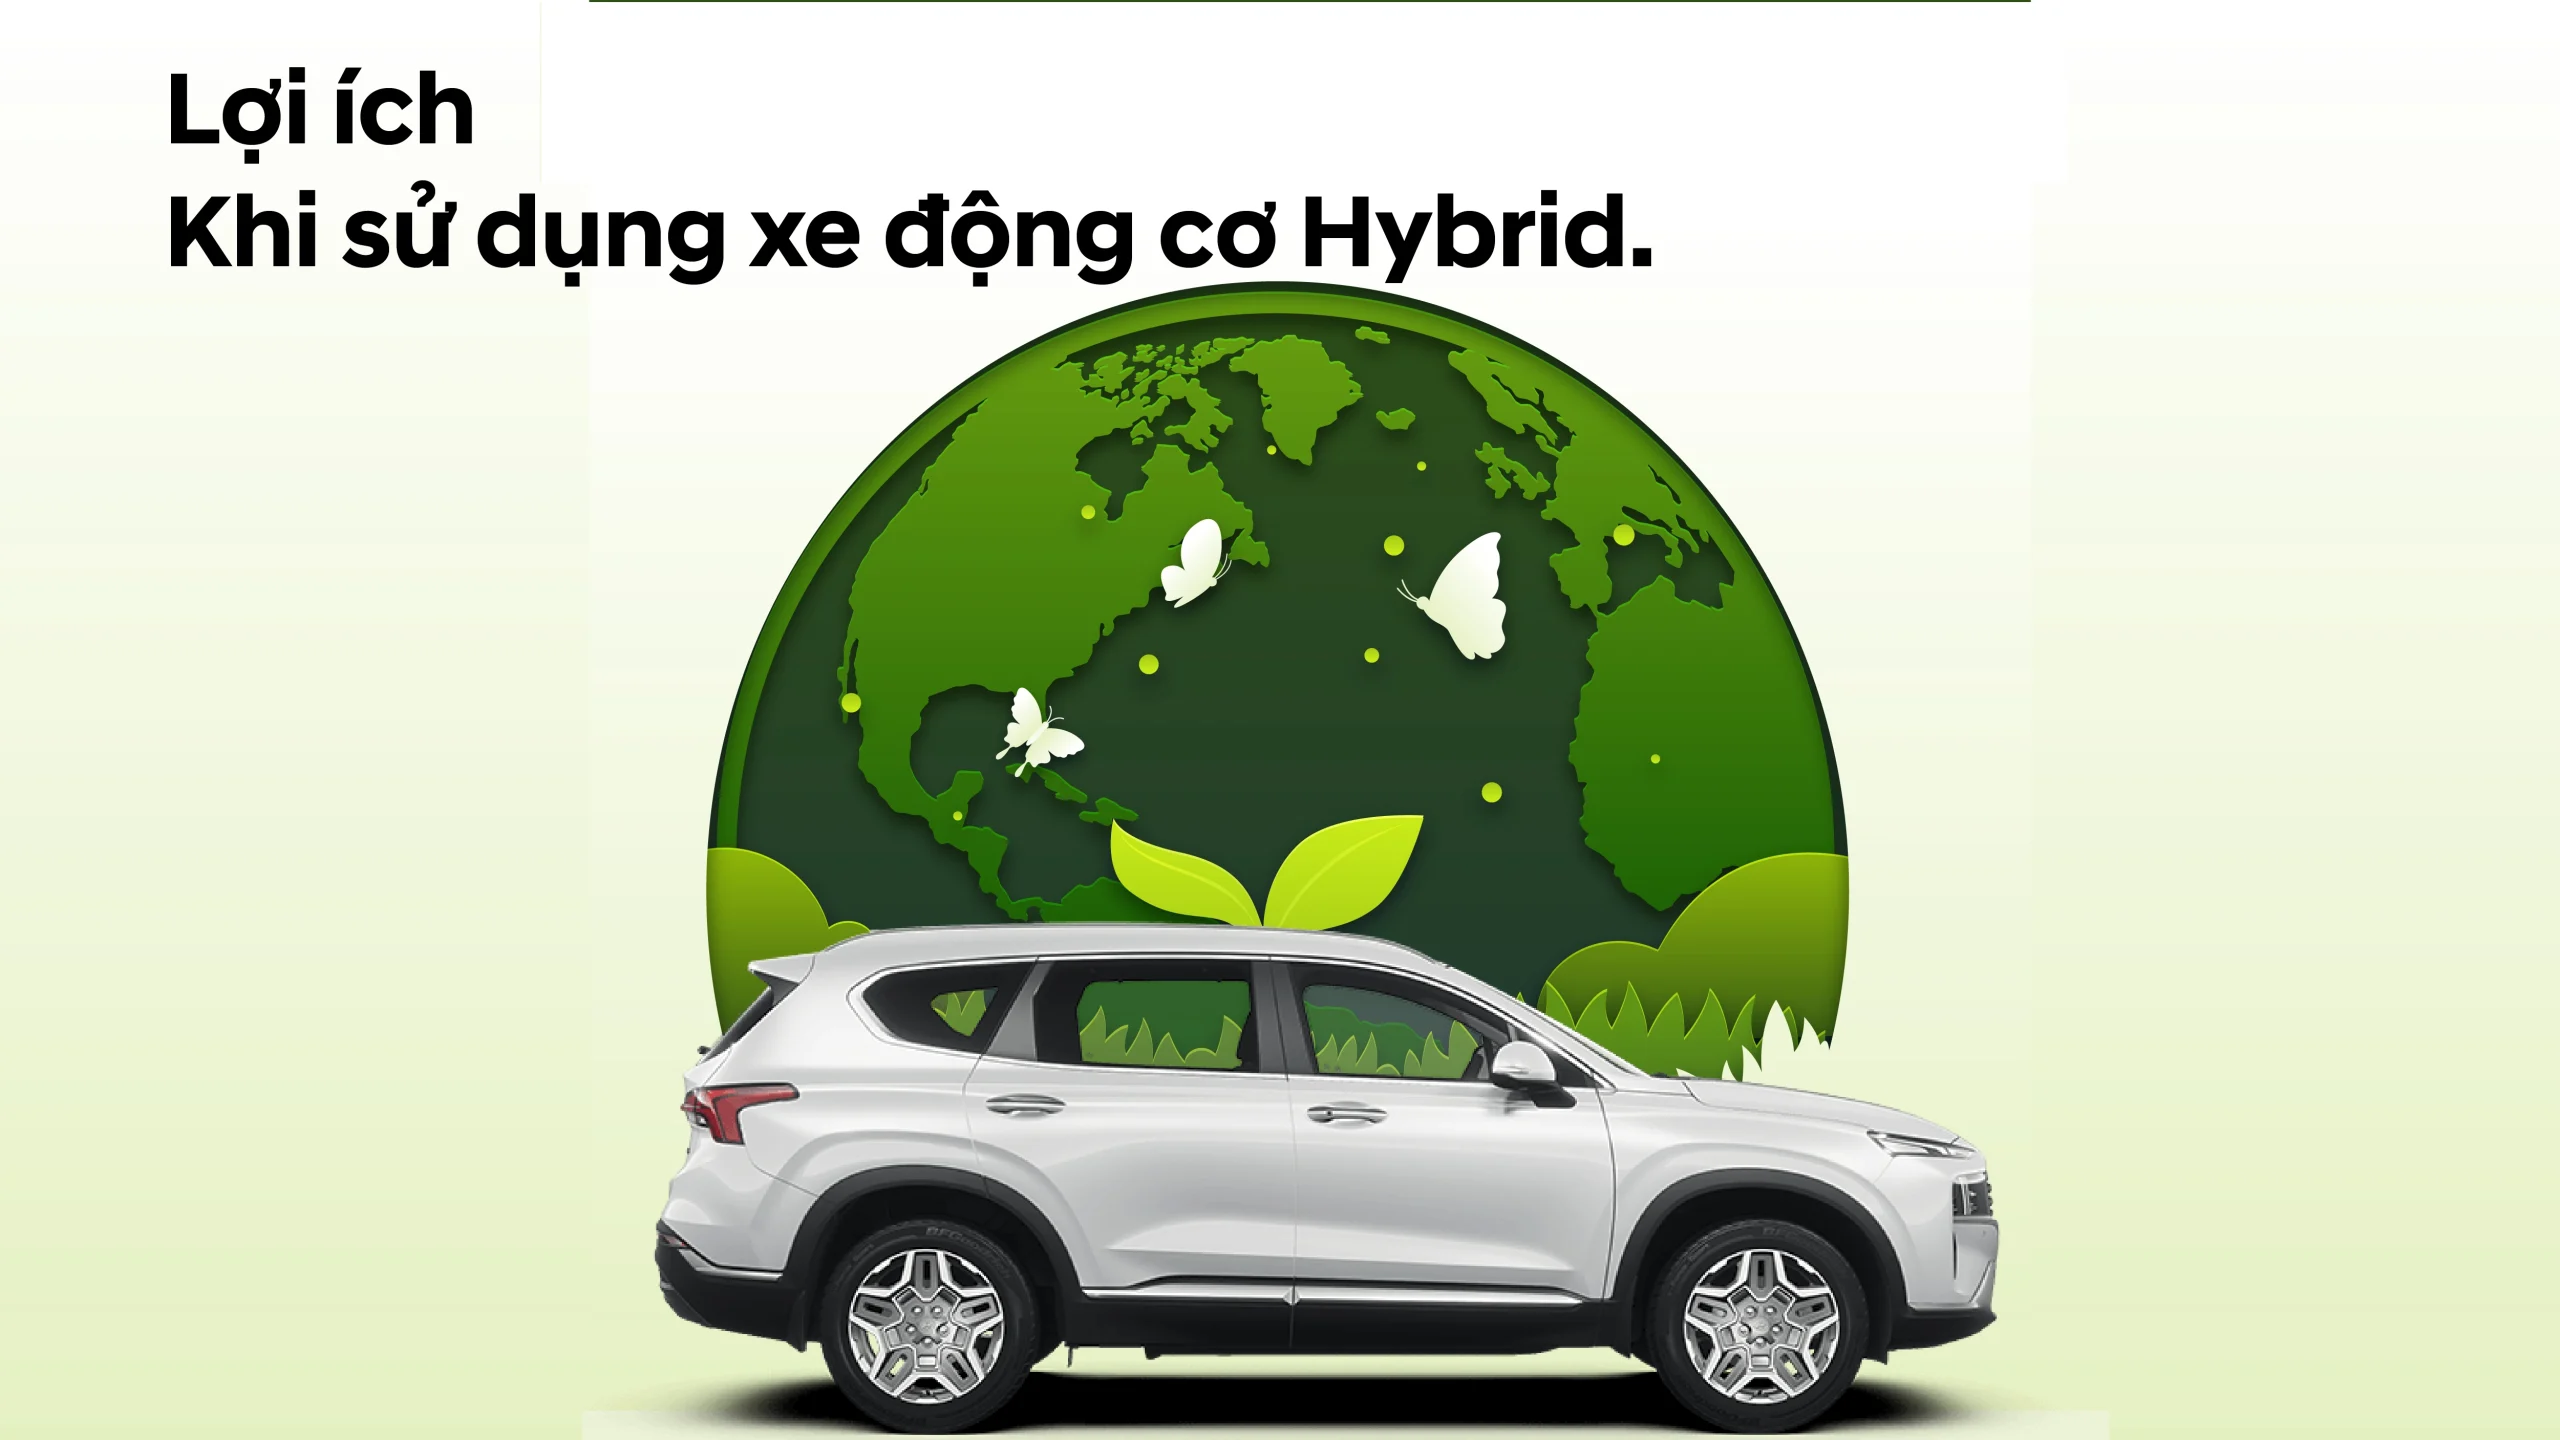 loi-ich-su-dung-xe-dong-co-hybrid